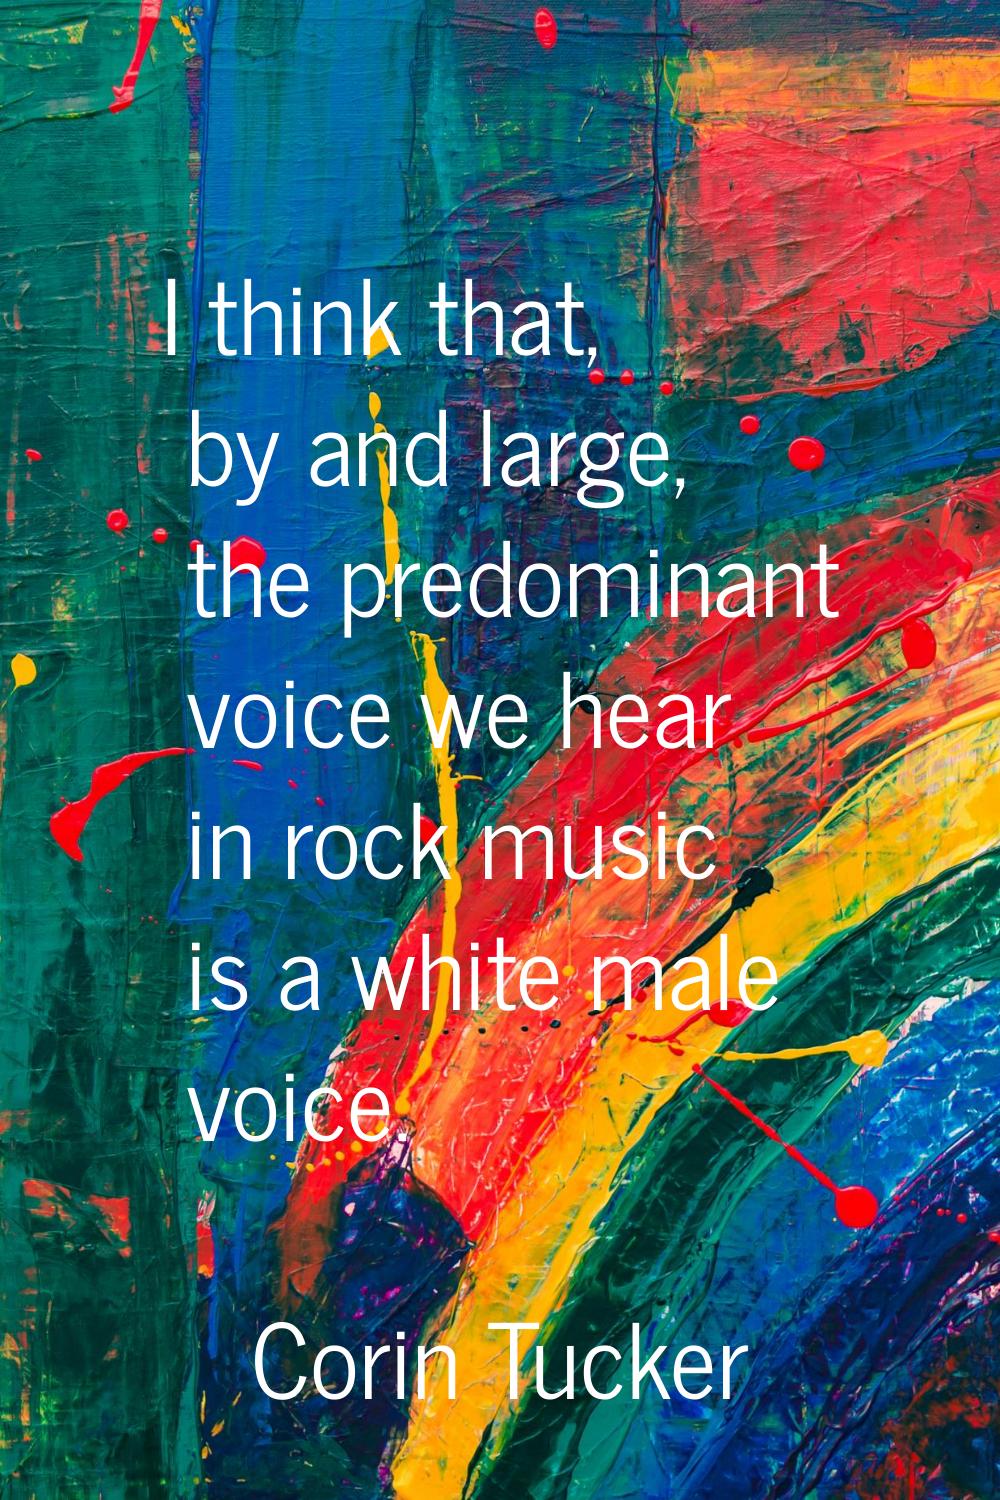 I think that, by and large, the predominant voice we hear in rock music is a white male voice.